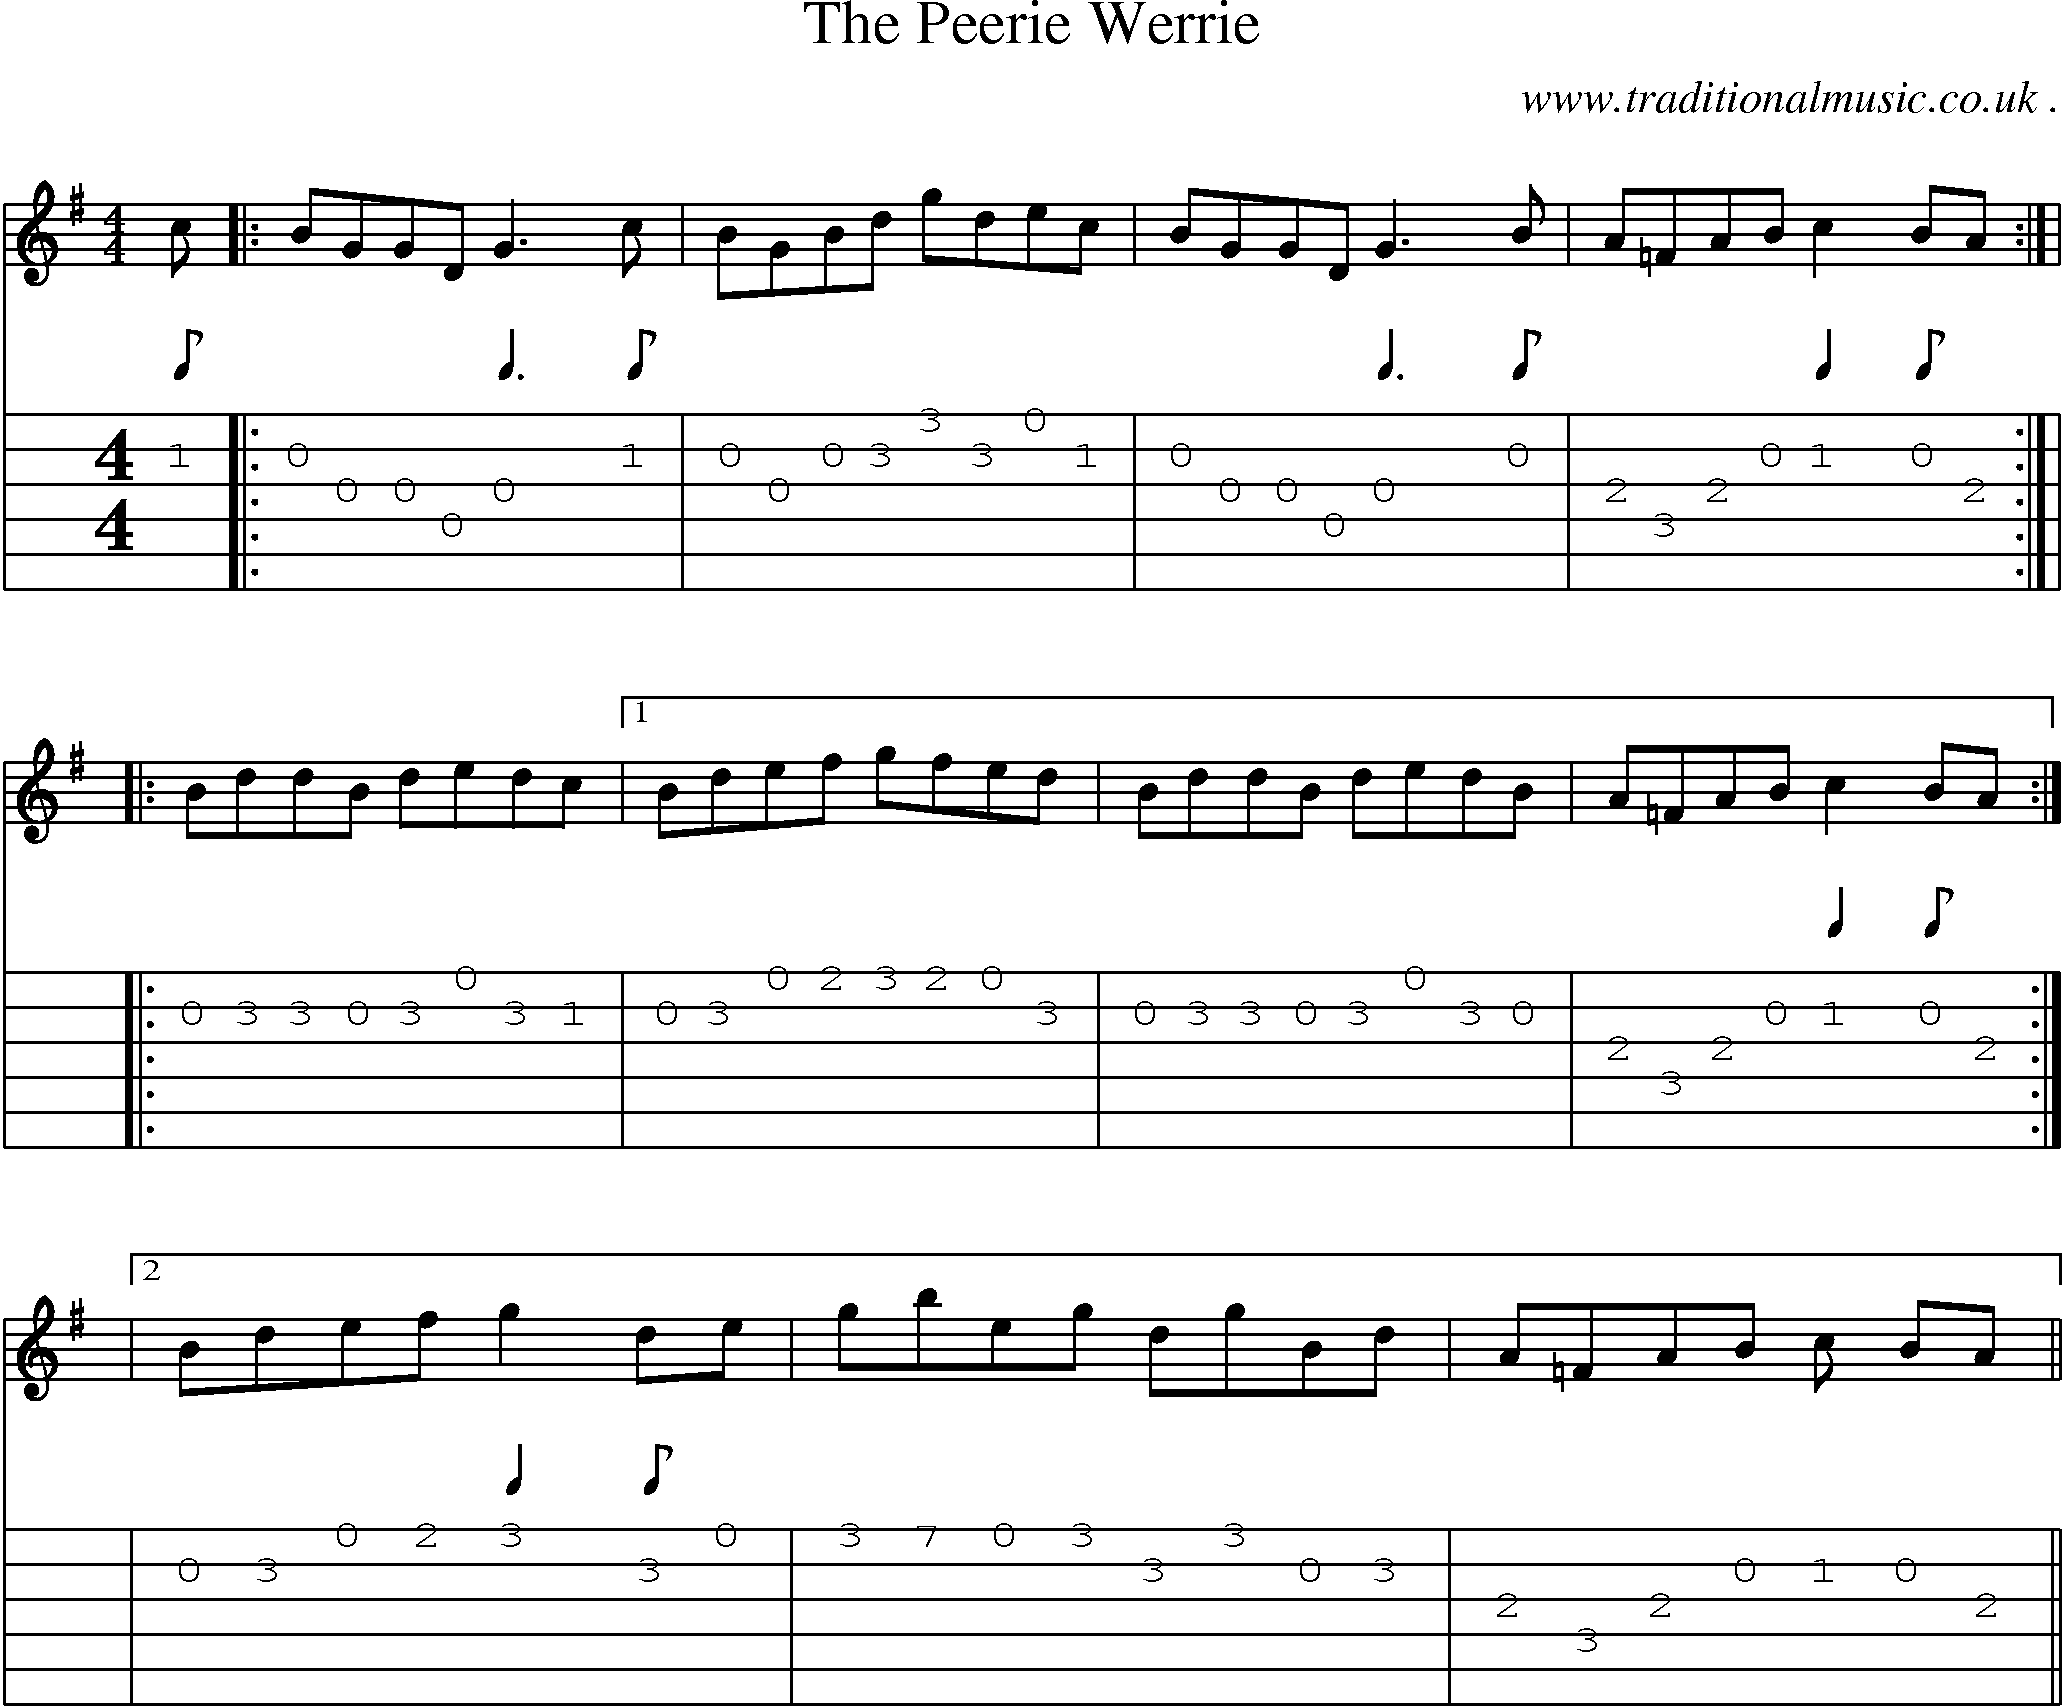 Music Score and Guitar Tabs for The Peerie Werrie